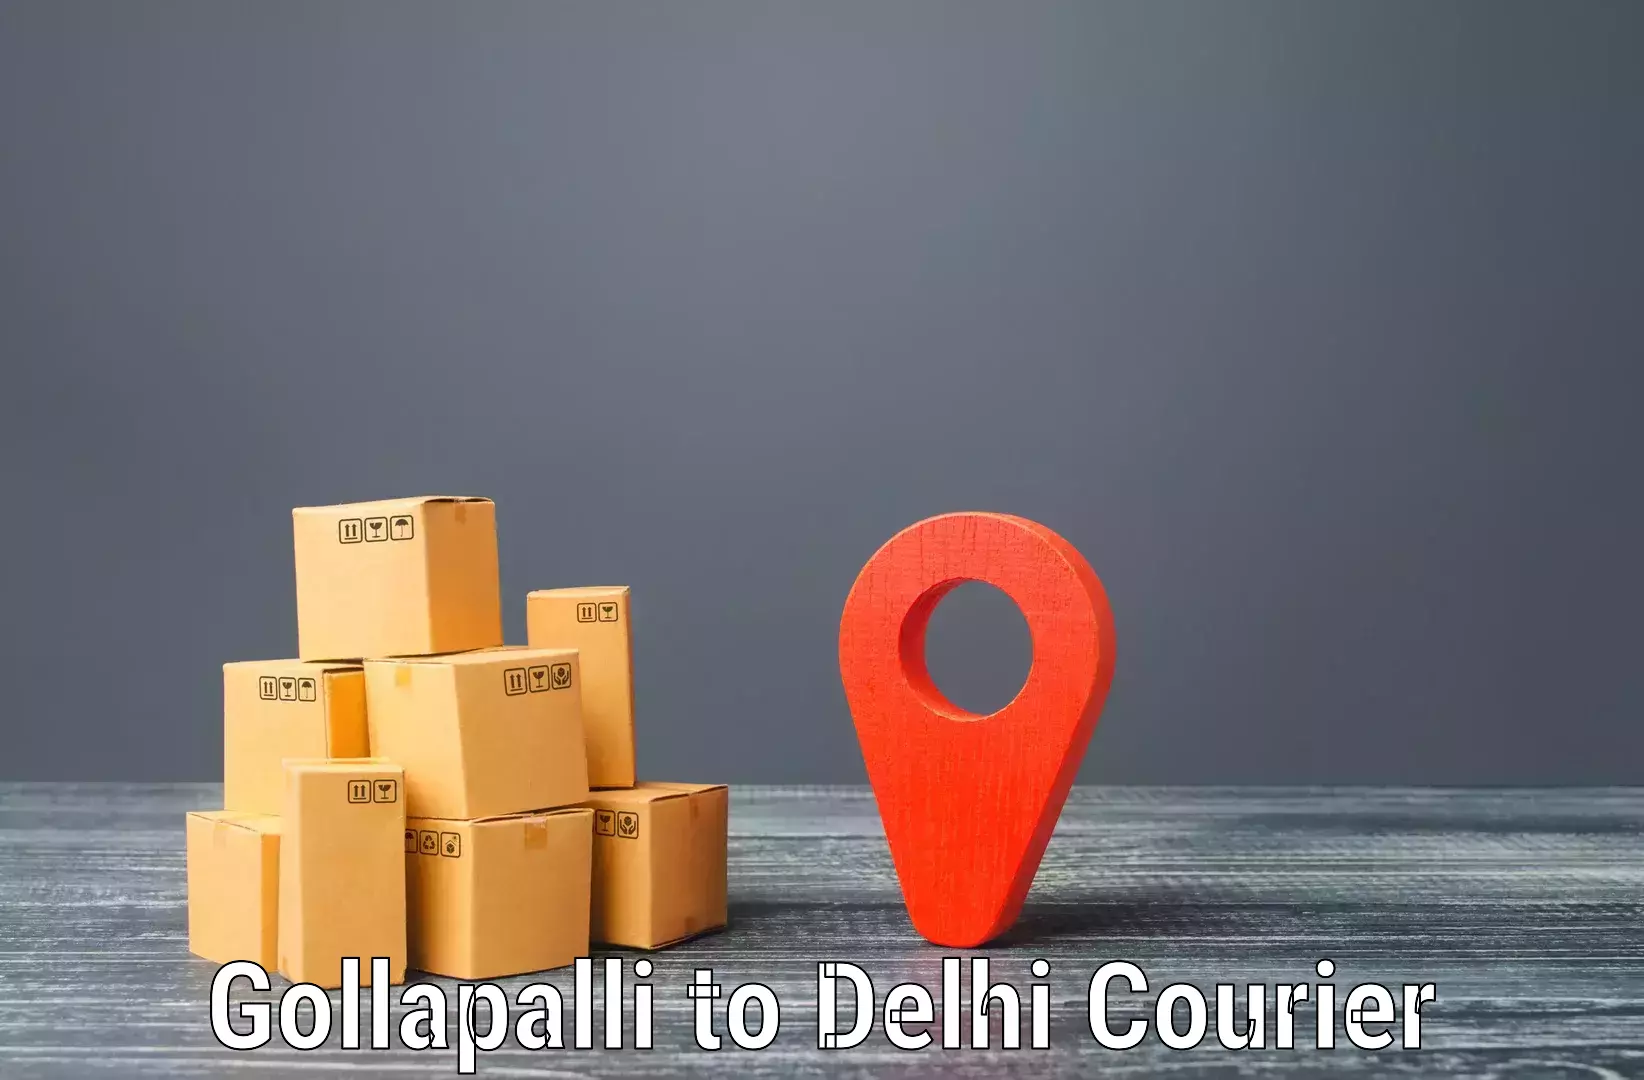 Automated parcel services Gollapalli to East Delhi